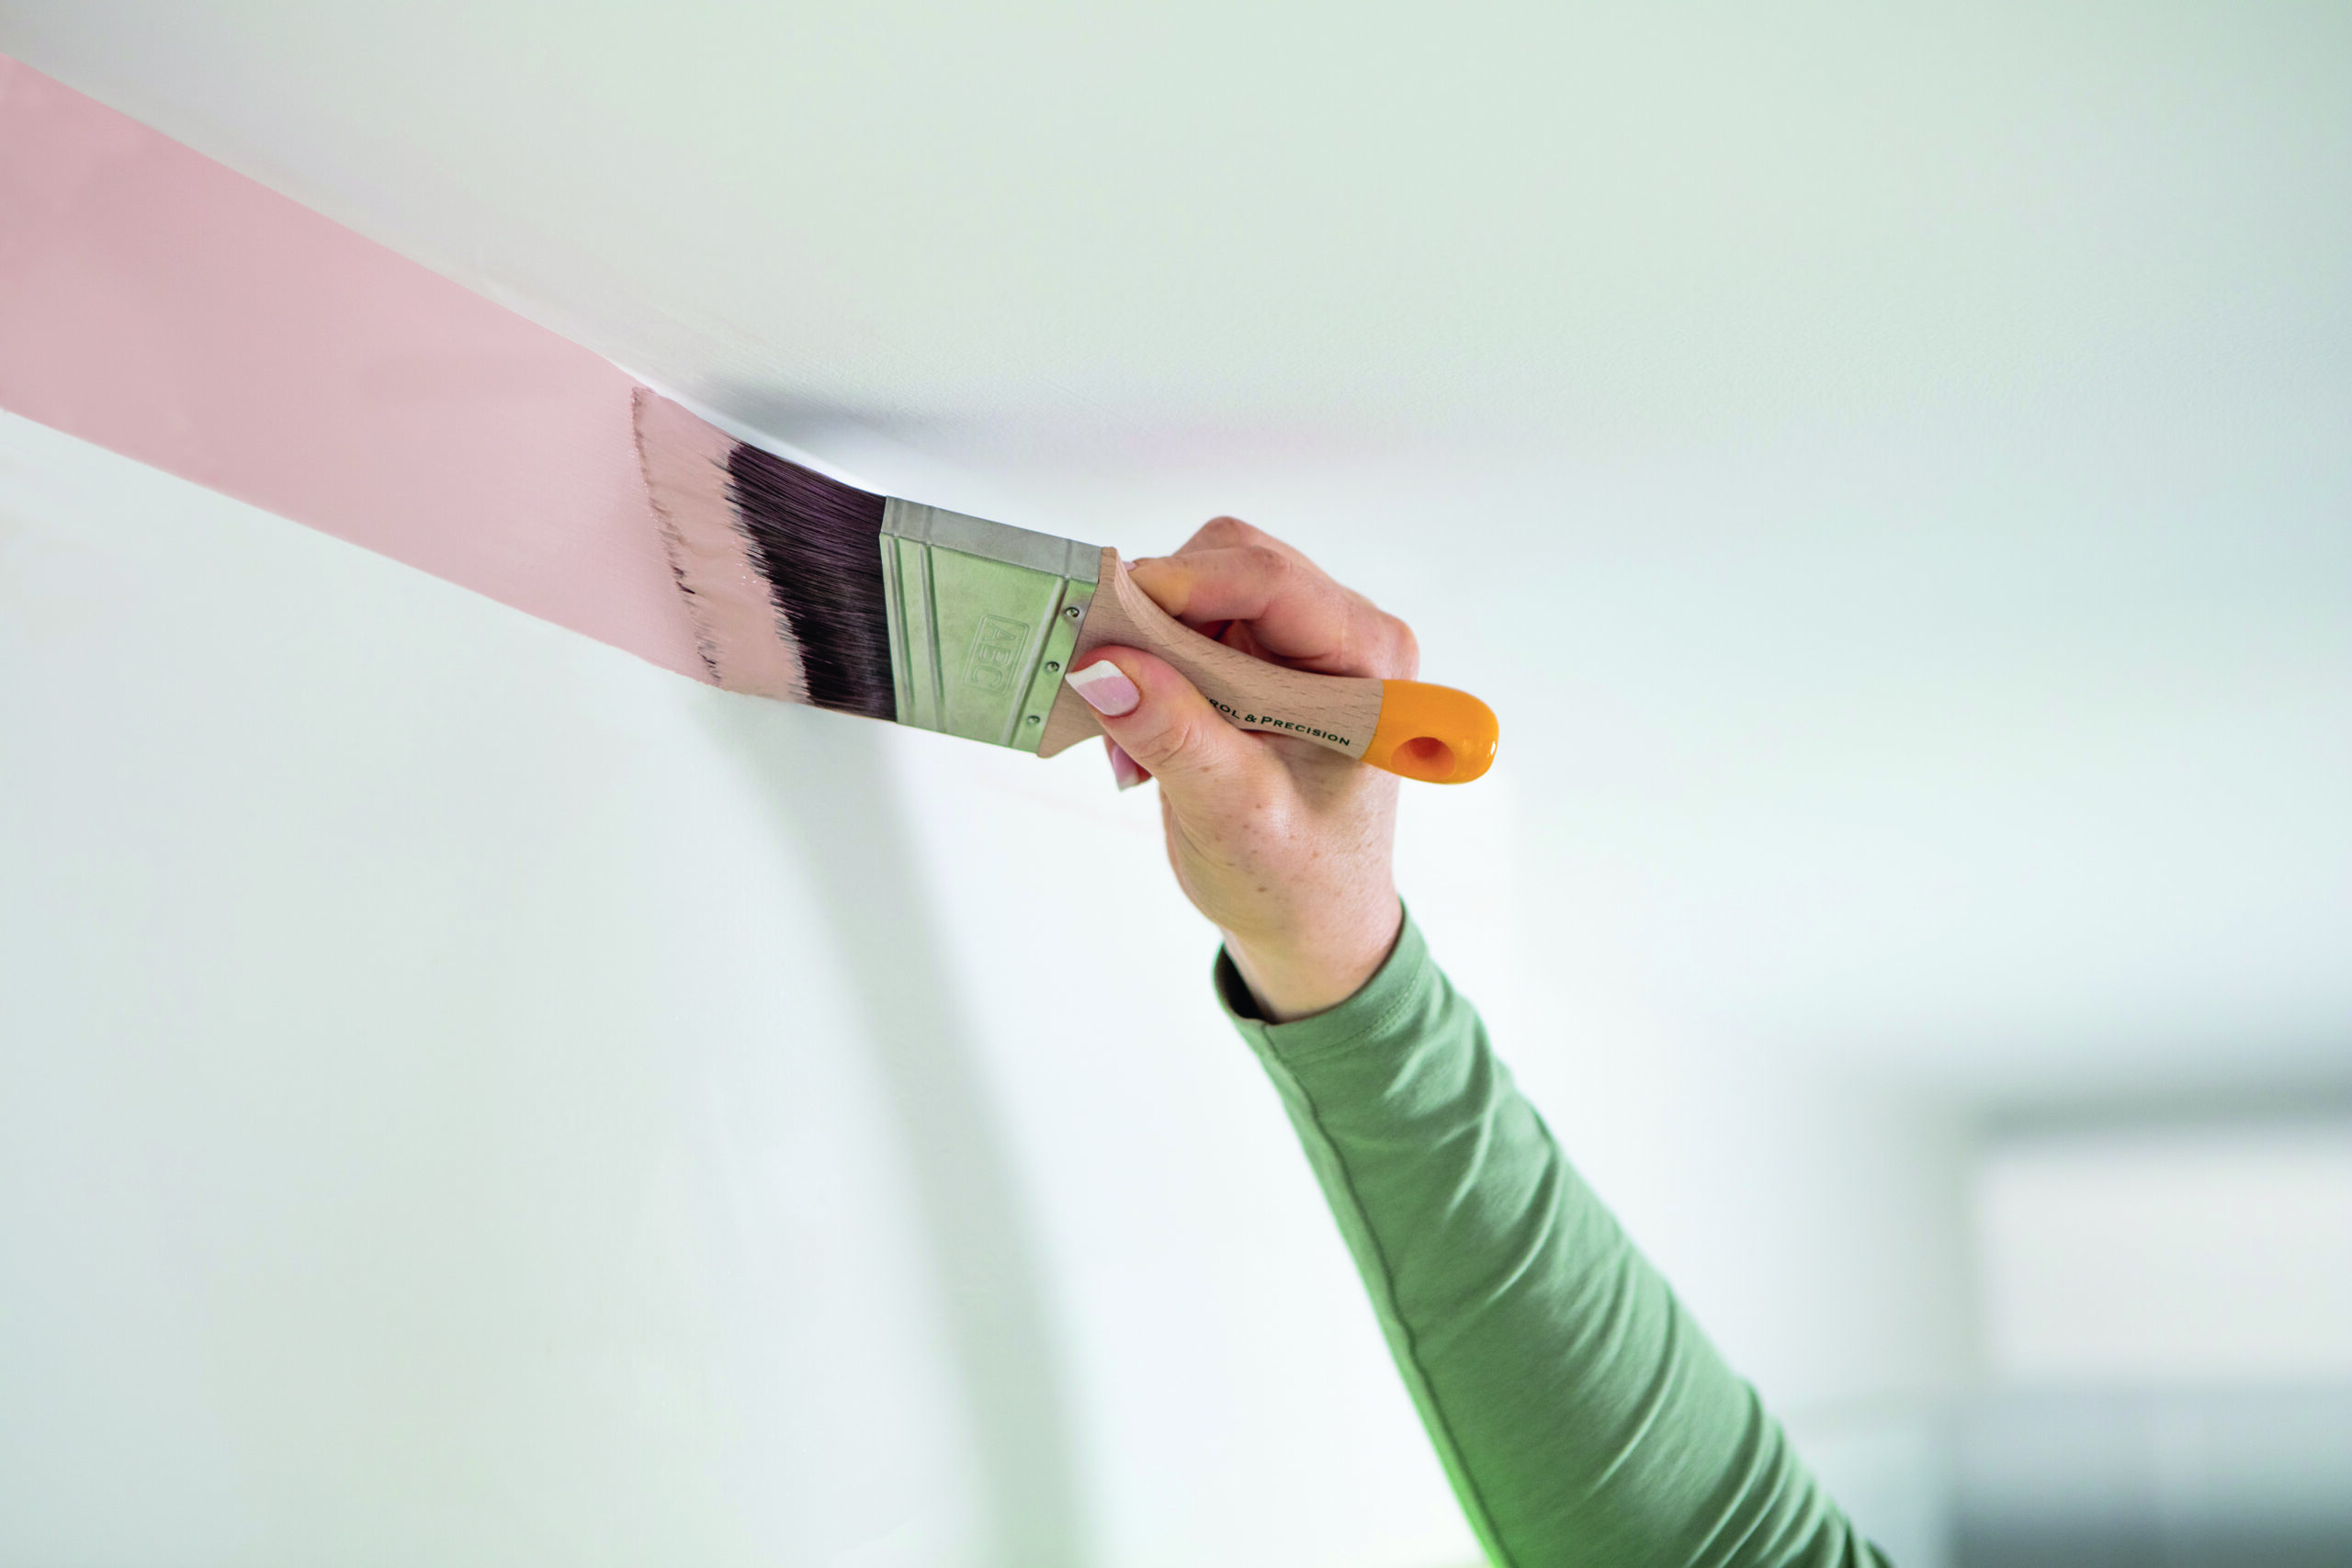 Painting interiors: everything you need to know about preparation and application to set started 

 

When painting the inside of your house, achieving a beautiful finish with ease is the goal. In order to achieve a quality finish, it’s important to be aware of the best way to prepare and paint your space, there are a few steps you need to consider as well as the order in which you go about painting your interior areas. Keep reading to lean more!  
 

Prepare your surfaces

First, you’ll need to prepare your surfaces. This involves sealing gaps between skirting boards, filling in any surface cracks which may be present on the wall and sand them down using Monarch Mini Fill Sand Go. This will ensure a smooth, even surface.  
Wash your surfaces with Sugar Soap to remove any grime or dust. Now you’re ready to paint!
 

Paint the ceilings first

The reason ceilings should be completed first is so you can paint underneath the lip of the cornice. This can be  a tricky area to cover and it will typically result in the paint spreading about 50mm onto the top of the wall. No need to worry – you will cover up this excess paint when you do your walls. 
We recommend using our Cornice & Ceiling Brush, as its triangular head gets into those tough spots well. 

 
Complete your walls one at a time
When the ceiling is finished, it’s time to paint walls. Focus on each wall in isolation when completing the process of both cutting in and rolling.
Cut in the edges using a Cutting In & Framing Brush. The angled head helps you to paint straighter lines with precision while not losing its shape. 
While the edges are still moist, load up your Walls & Ceilings Roller with paint. Using the width of your roller as a guide, tackle your wall in sections. Starting in the mid-section, roll up and down the wall from floor to ceiling a couple of times, to achieve an even, smooth finish.
When you’ve rolled your walls, you’ll noticed that the edges you cut in with the brush have blended together seamlessly. 
 

Finish with your trims
Use your Walls, Doors & Trims Brush to paint your trims, such as doors, window frames and skirting boards, as the final step in your interior room job. 

HANDY TIP – While we all know it’s important to complete at least two coats of paint on the walls, we recommend also doing a first coat on your trims. During this coat, pay attention to getting good coverage on the edges of the trims that touch the walls.

This way, you can then finish the second coat on walls, and then, doing trims last, you don’t have to paint those hard-to-reach trim edges again. This avoids worrying about getting trim paint on the walls by trying to get perfect straight edges.

For more advice on how to select the perfect paint accessory for your next project, take a look at our product finder tool and discover a bunch of painting tips, tricks and inspiration by following us on Instagram and Facebook.
